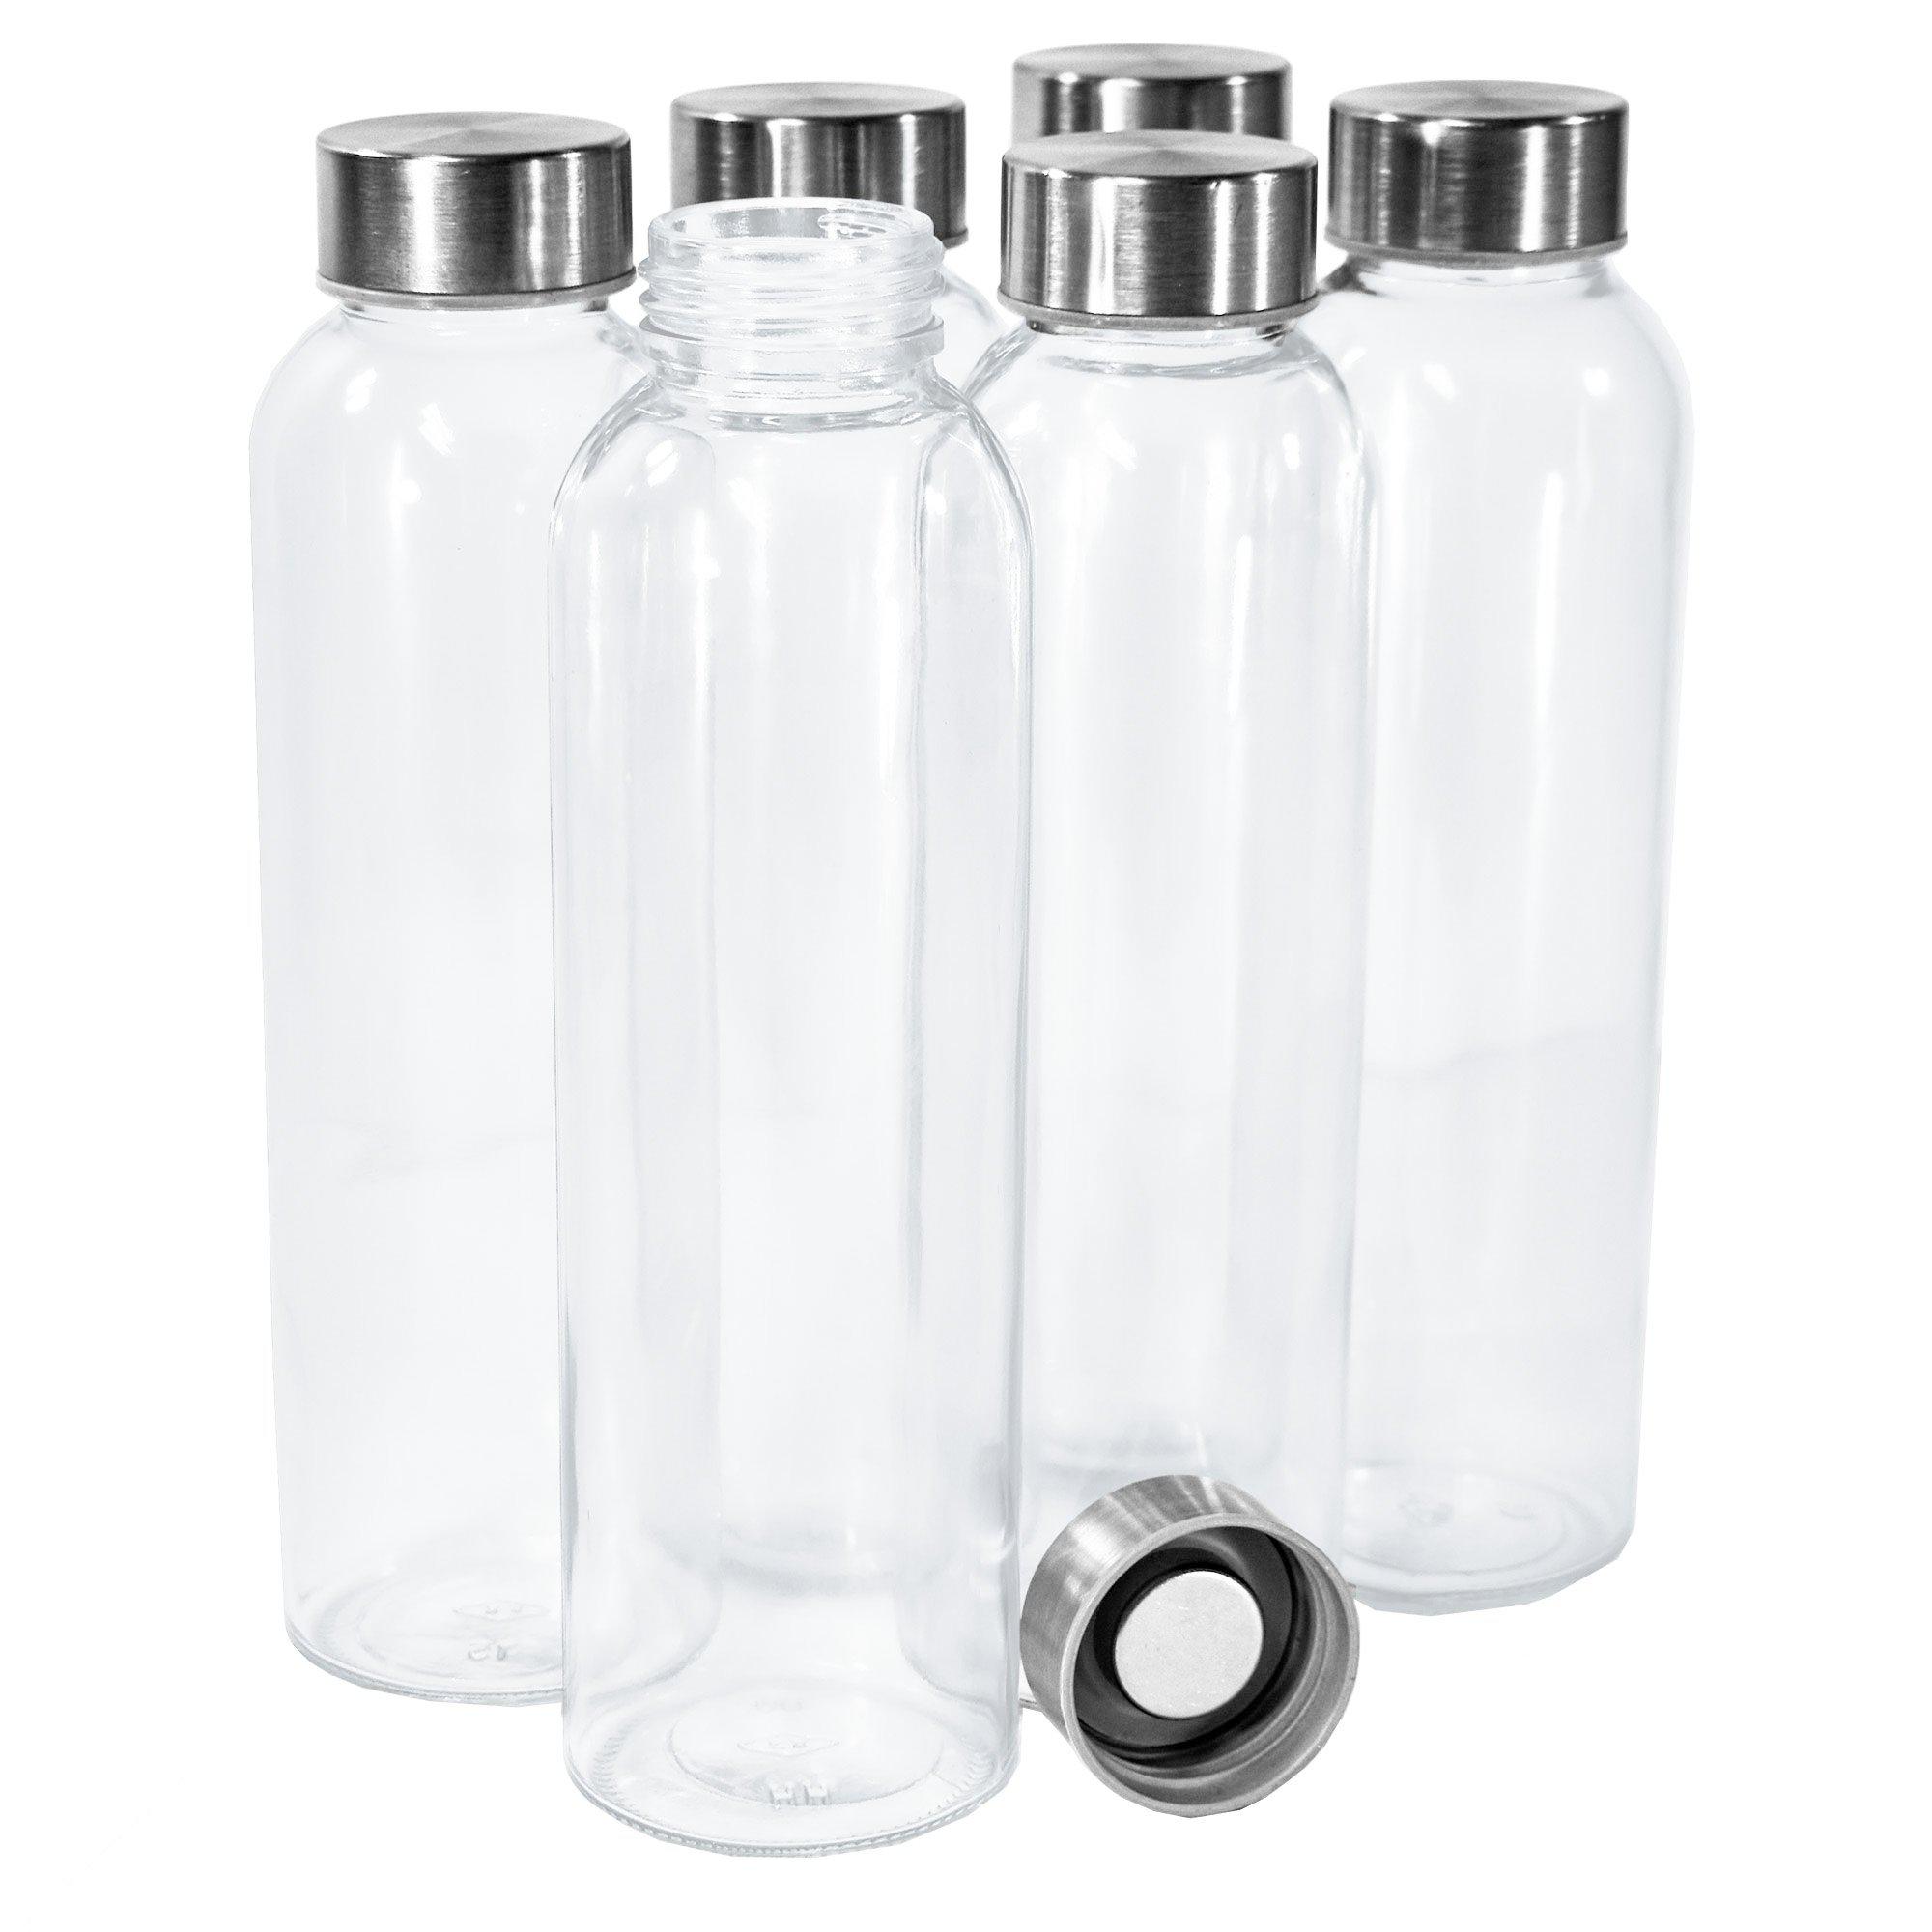 Clear Glass Bottles with Lids 18 oz, Reusable Glass Water Bottles with  Stainless Steel Cap for Juicing,Refrigerator,100% Leak Proof, BPA Free Eco  Friendly,Set of 6 